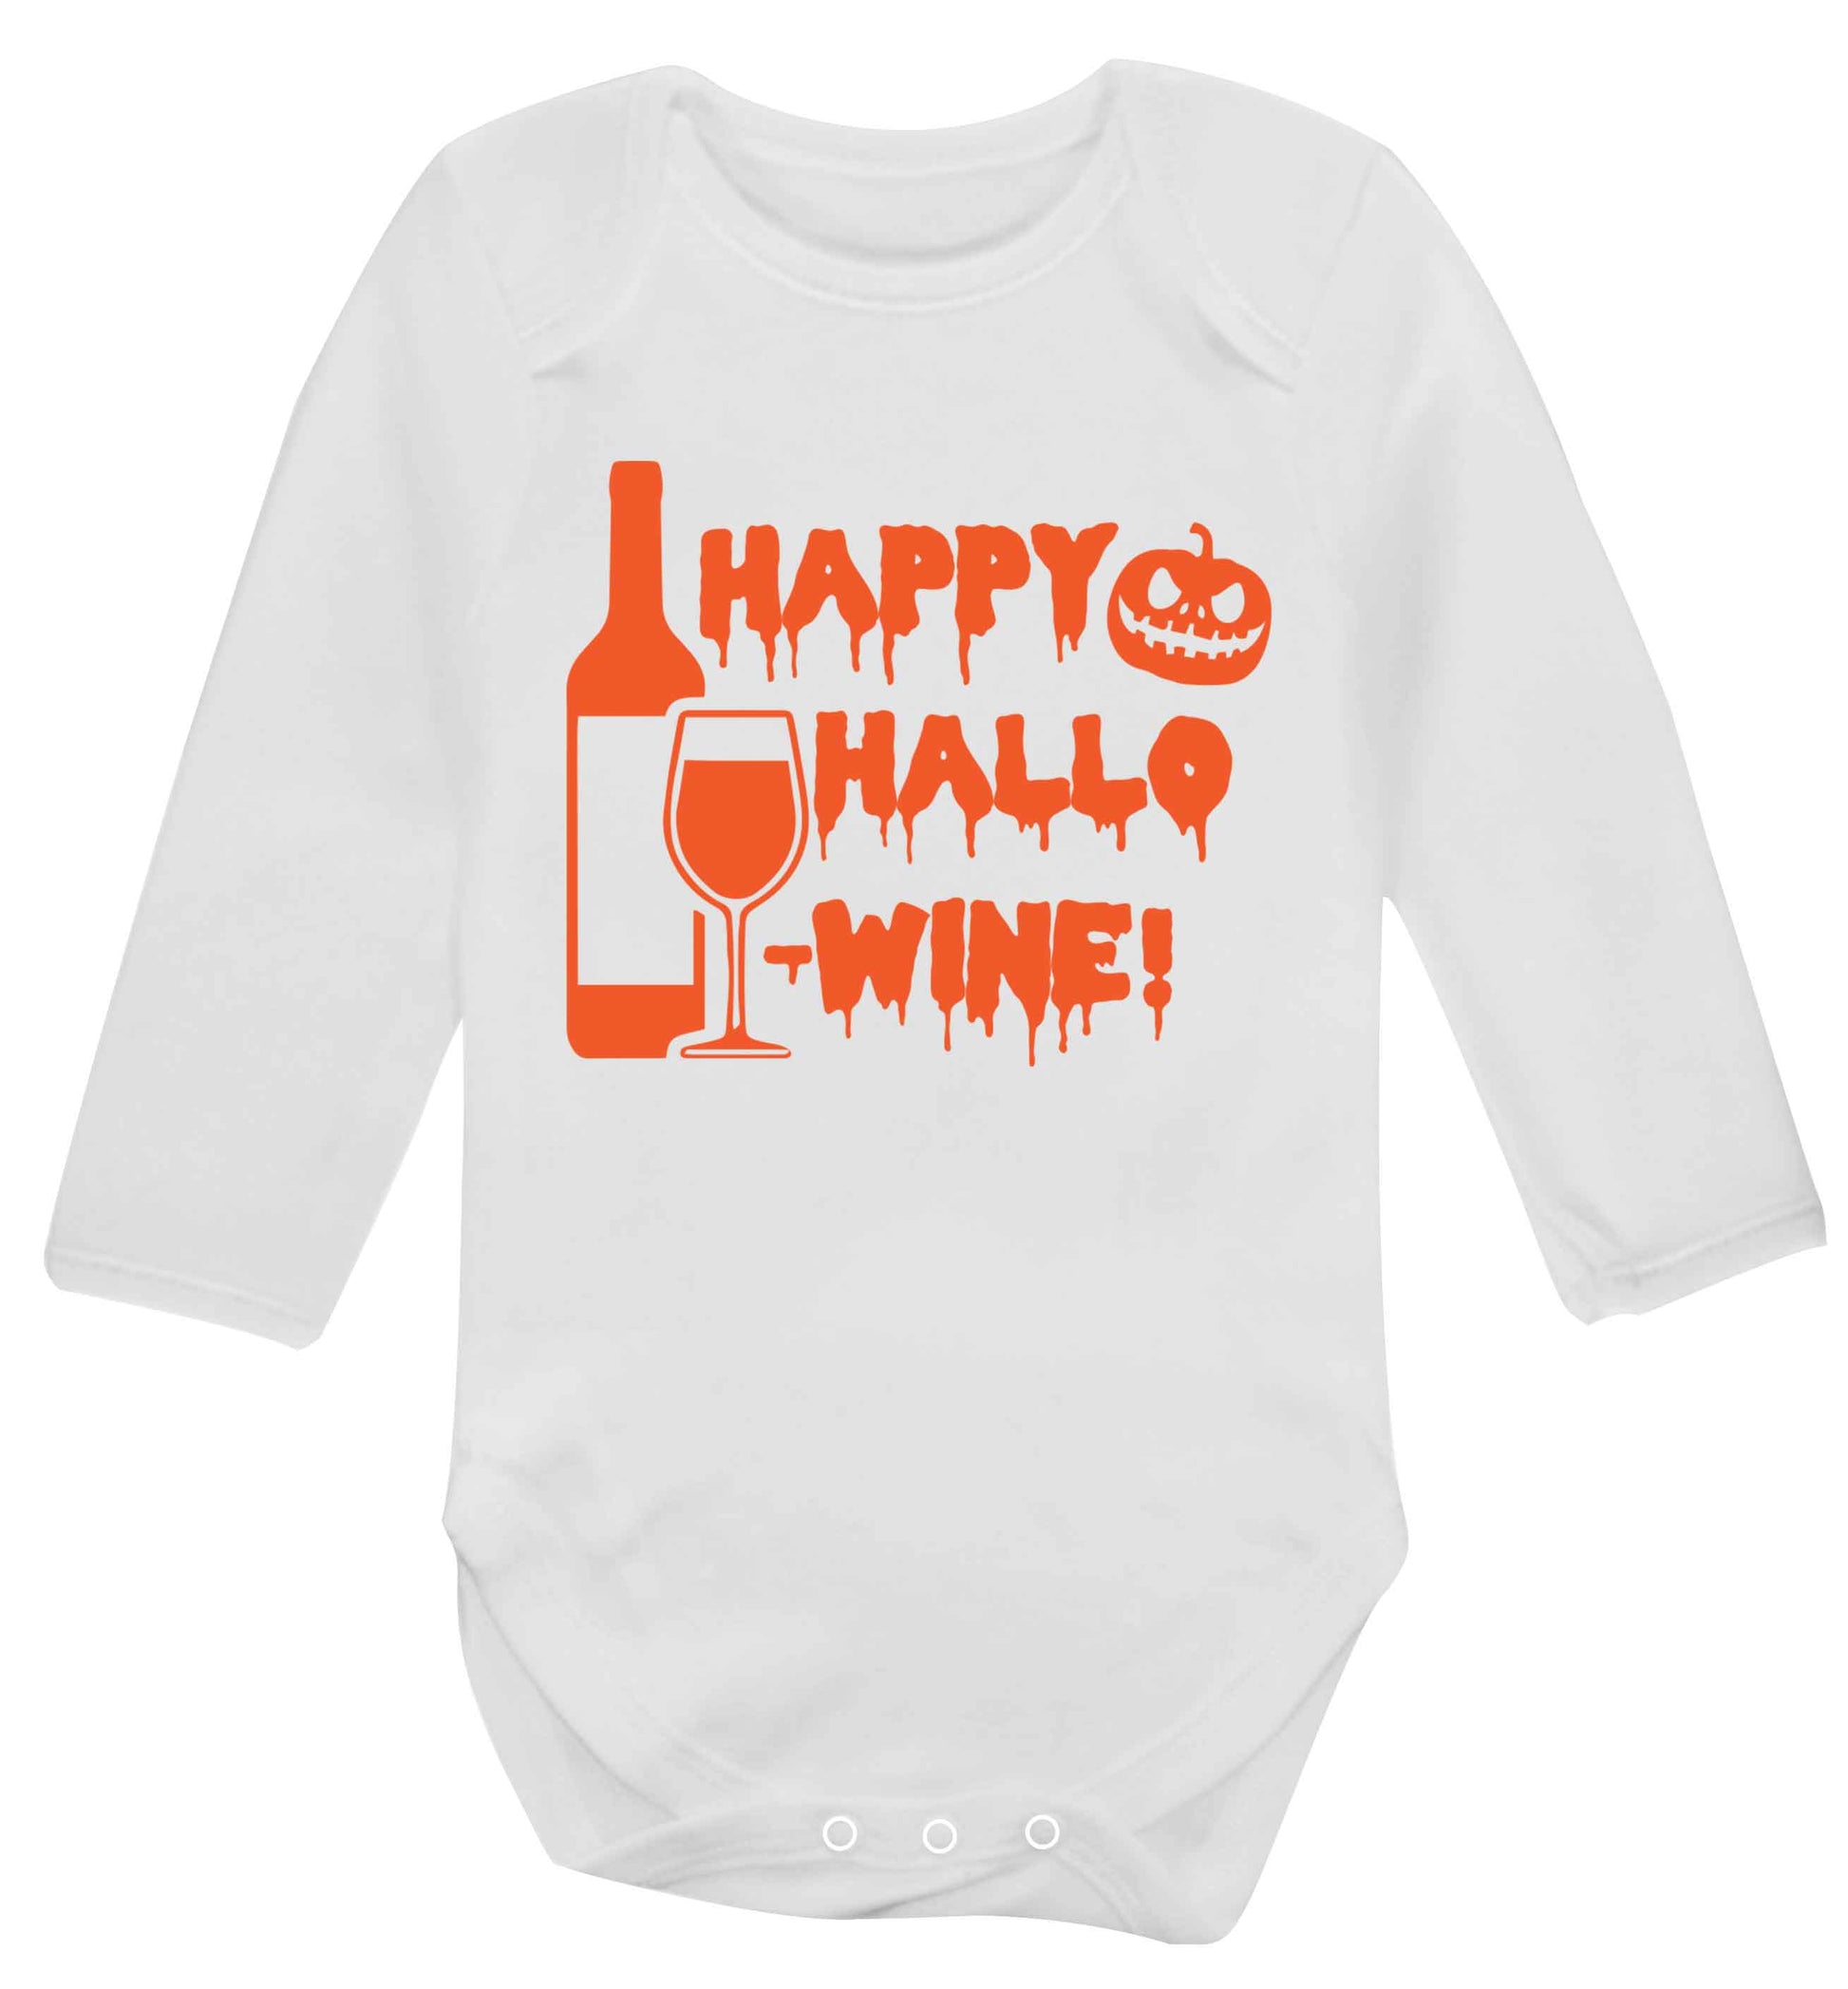 Happy hallow-wine Baby Vest long sleeved white 6-12 months